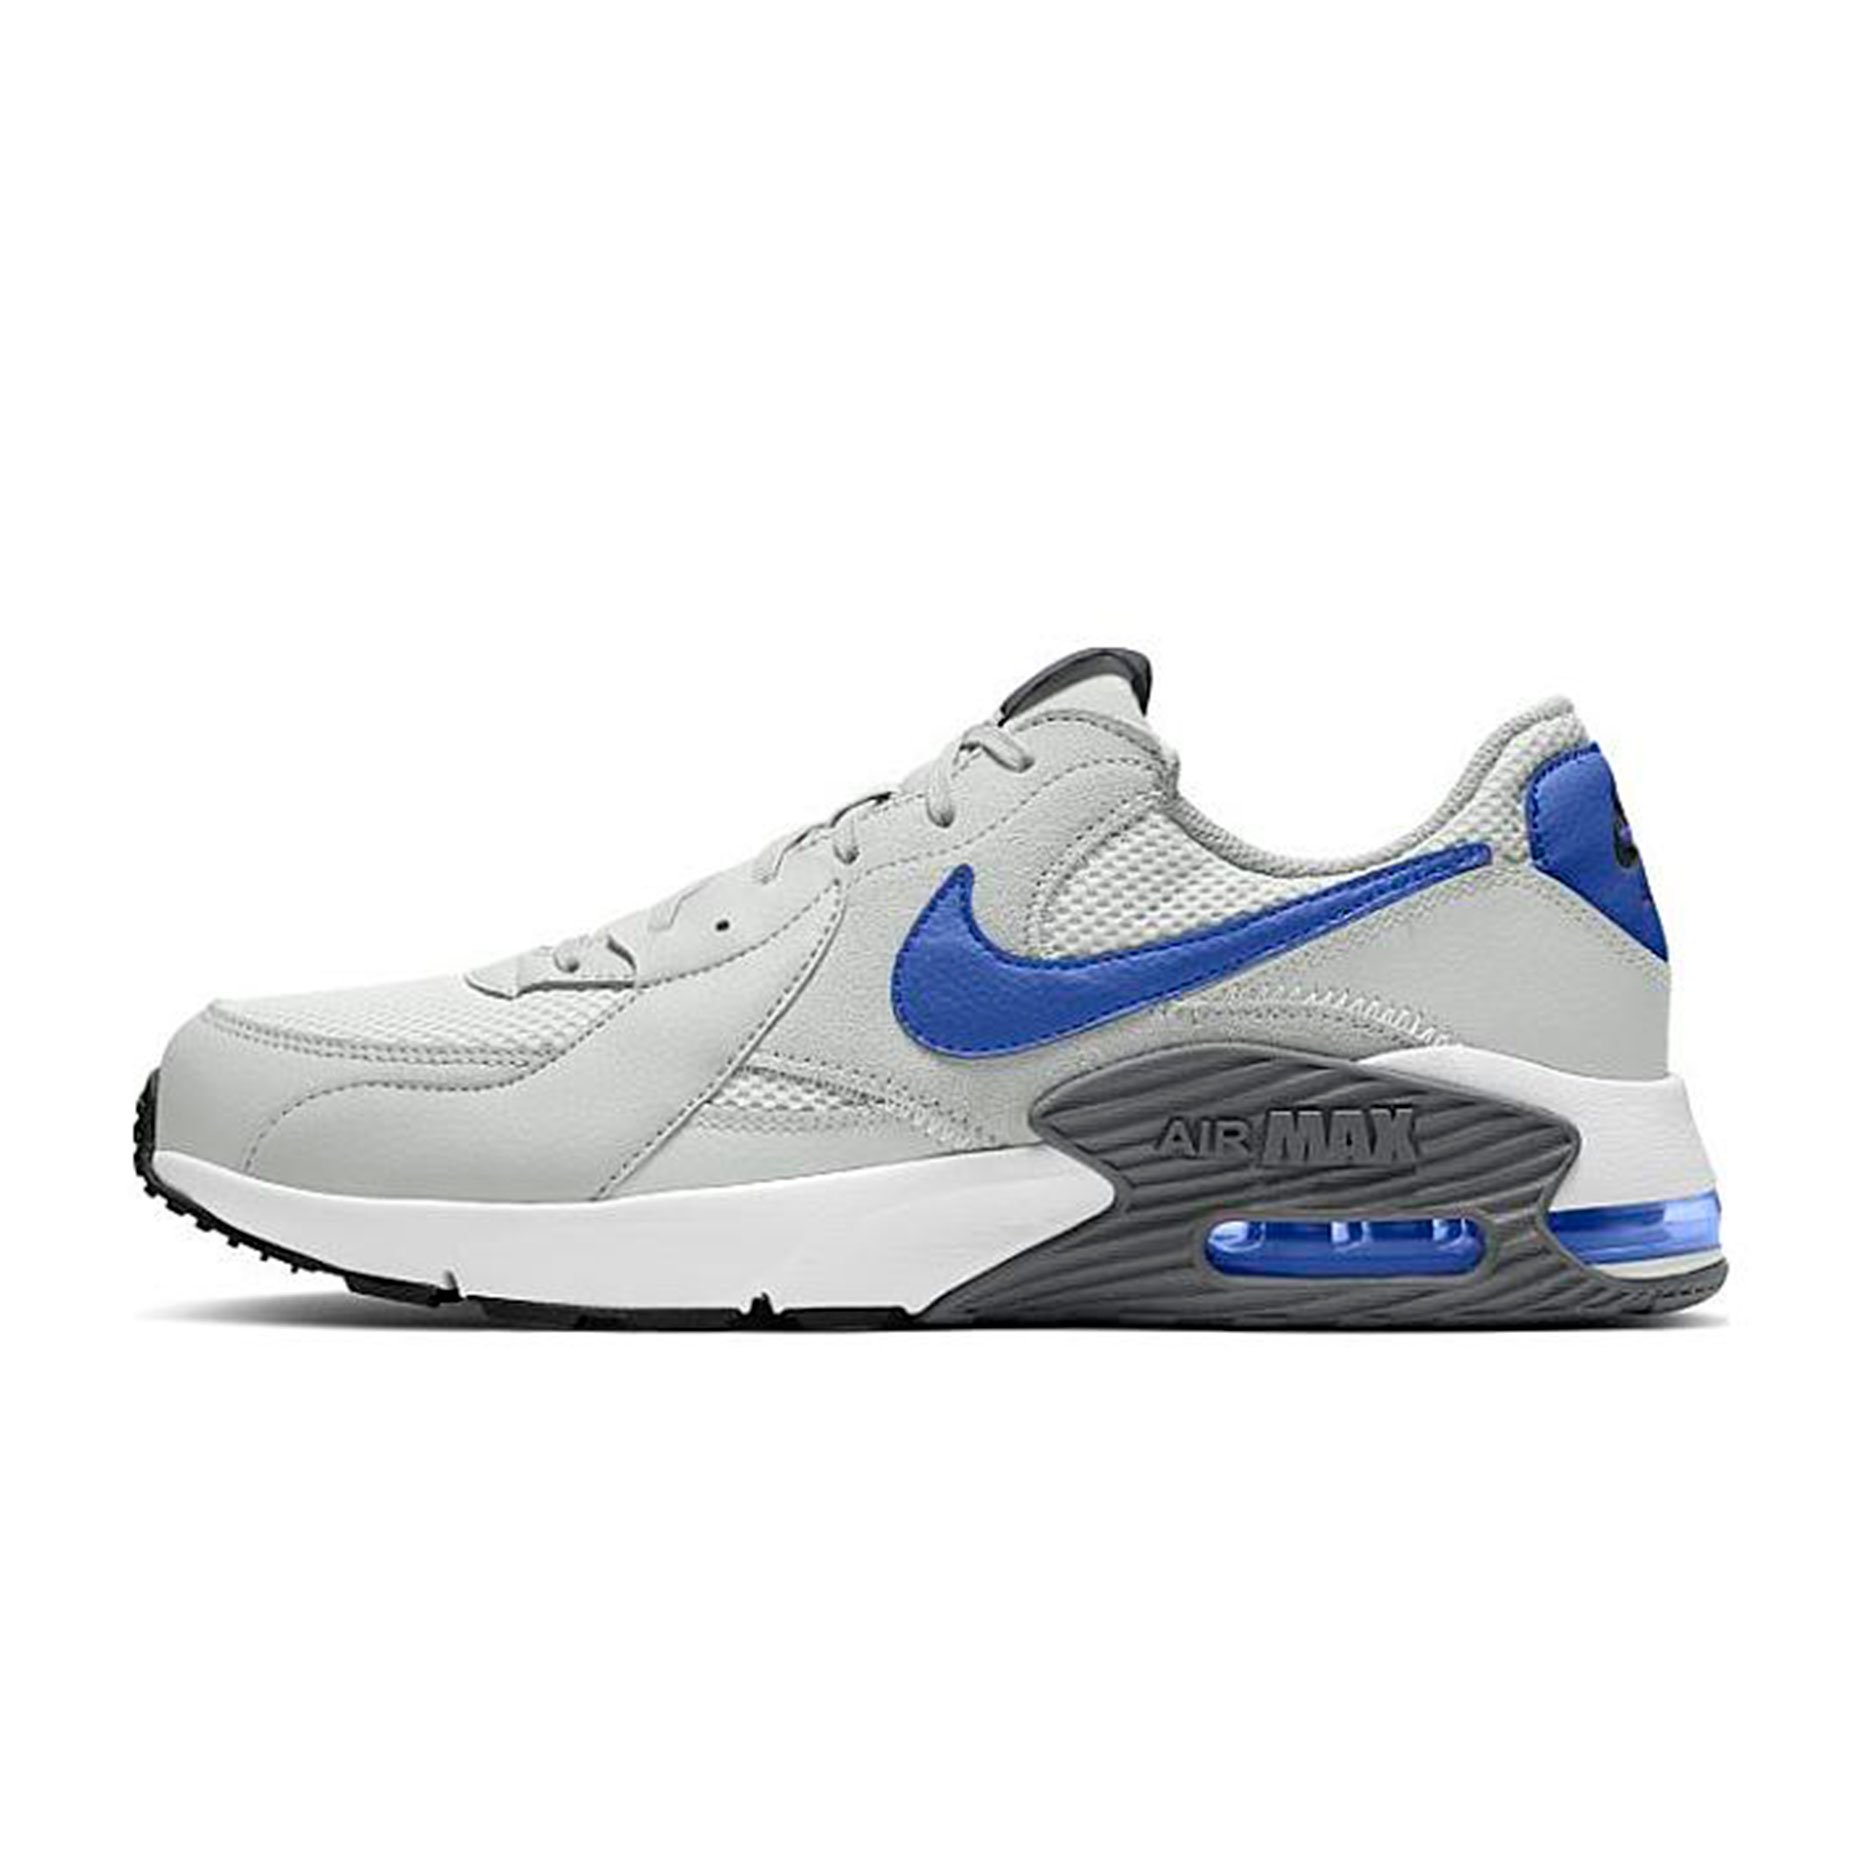 Кроссовки Nike Air Max Excee